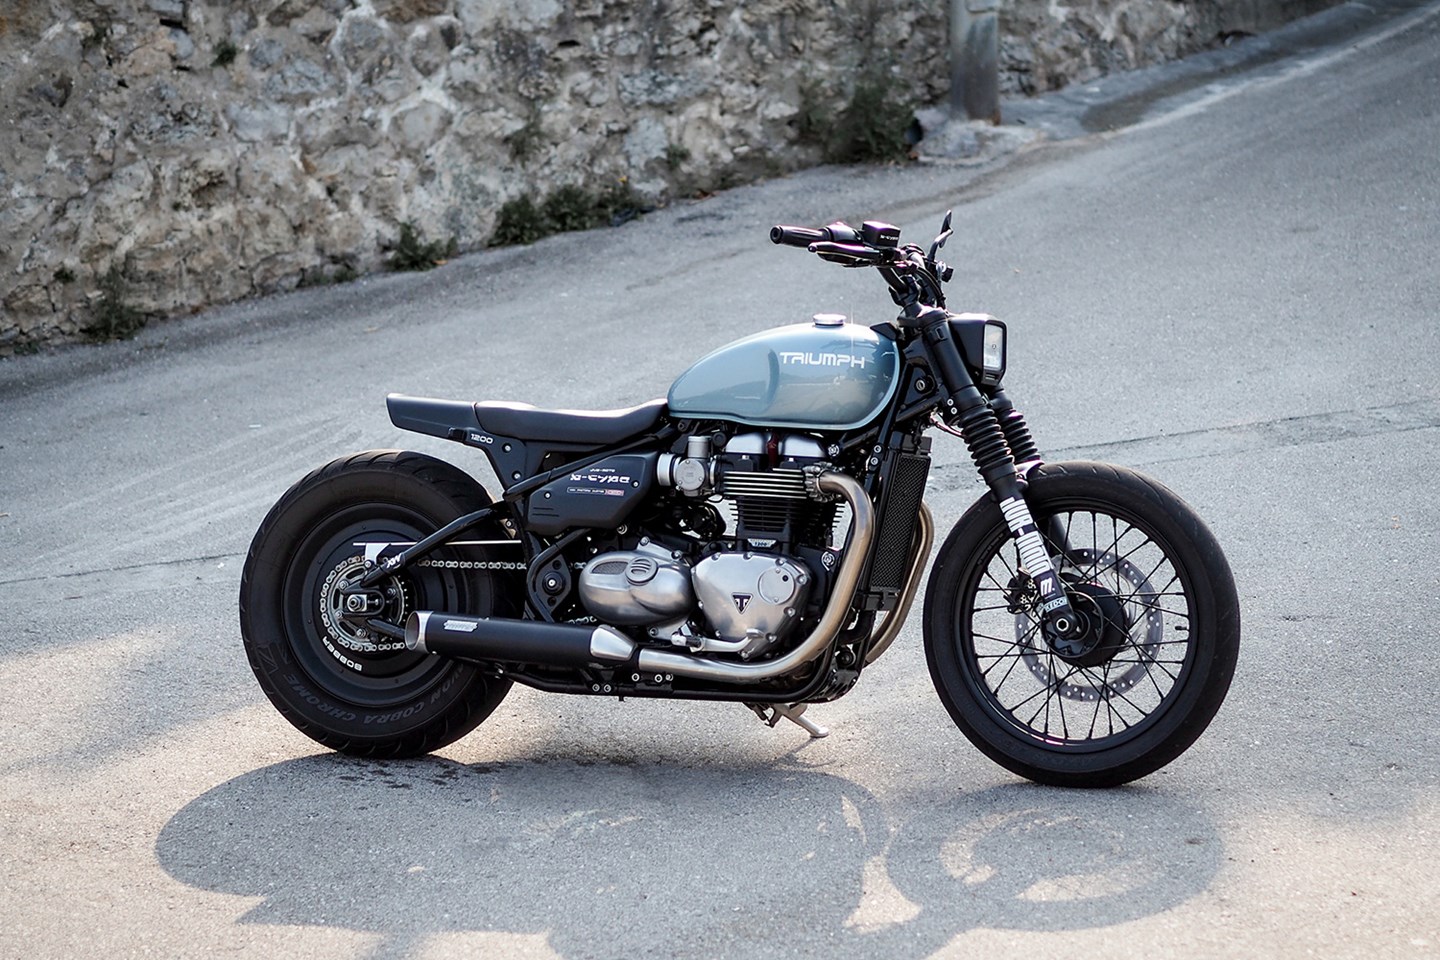 https://mcn-images.bauersecure.com/wp-images/189584/1440x960/jvb_triumph_bobber_1.jpg?mode=max&quality=90&scale=down